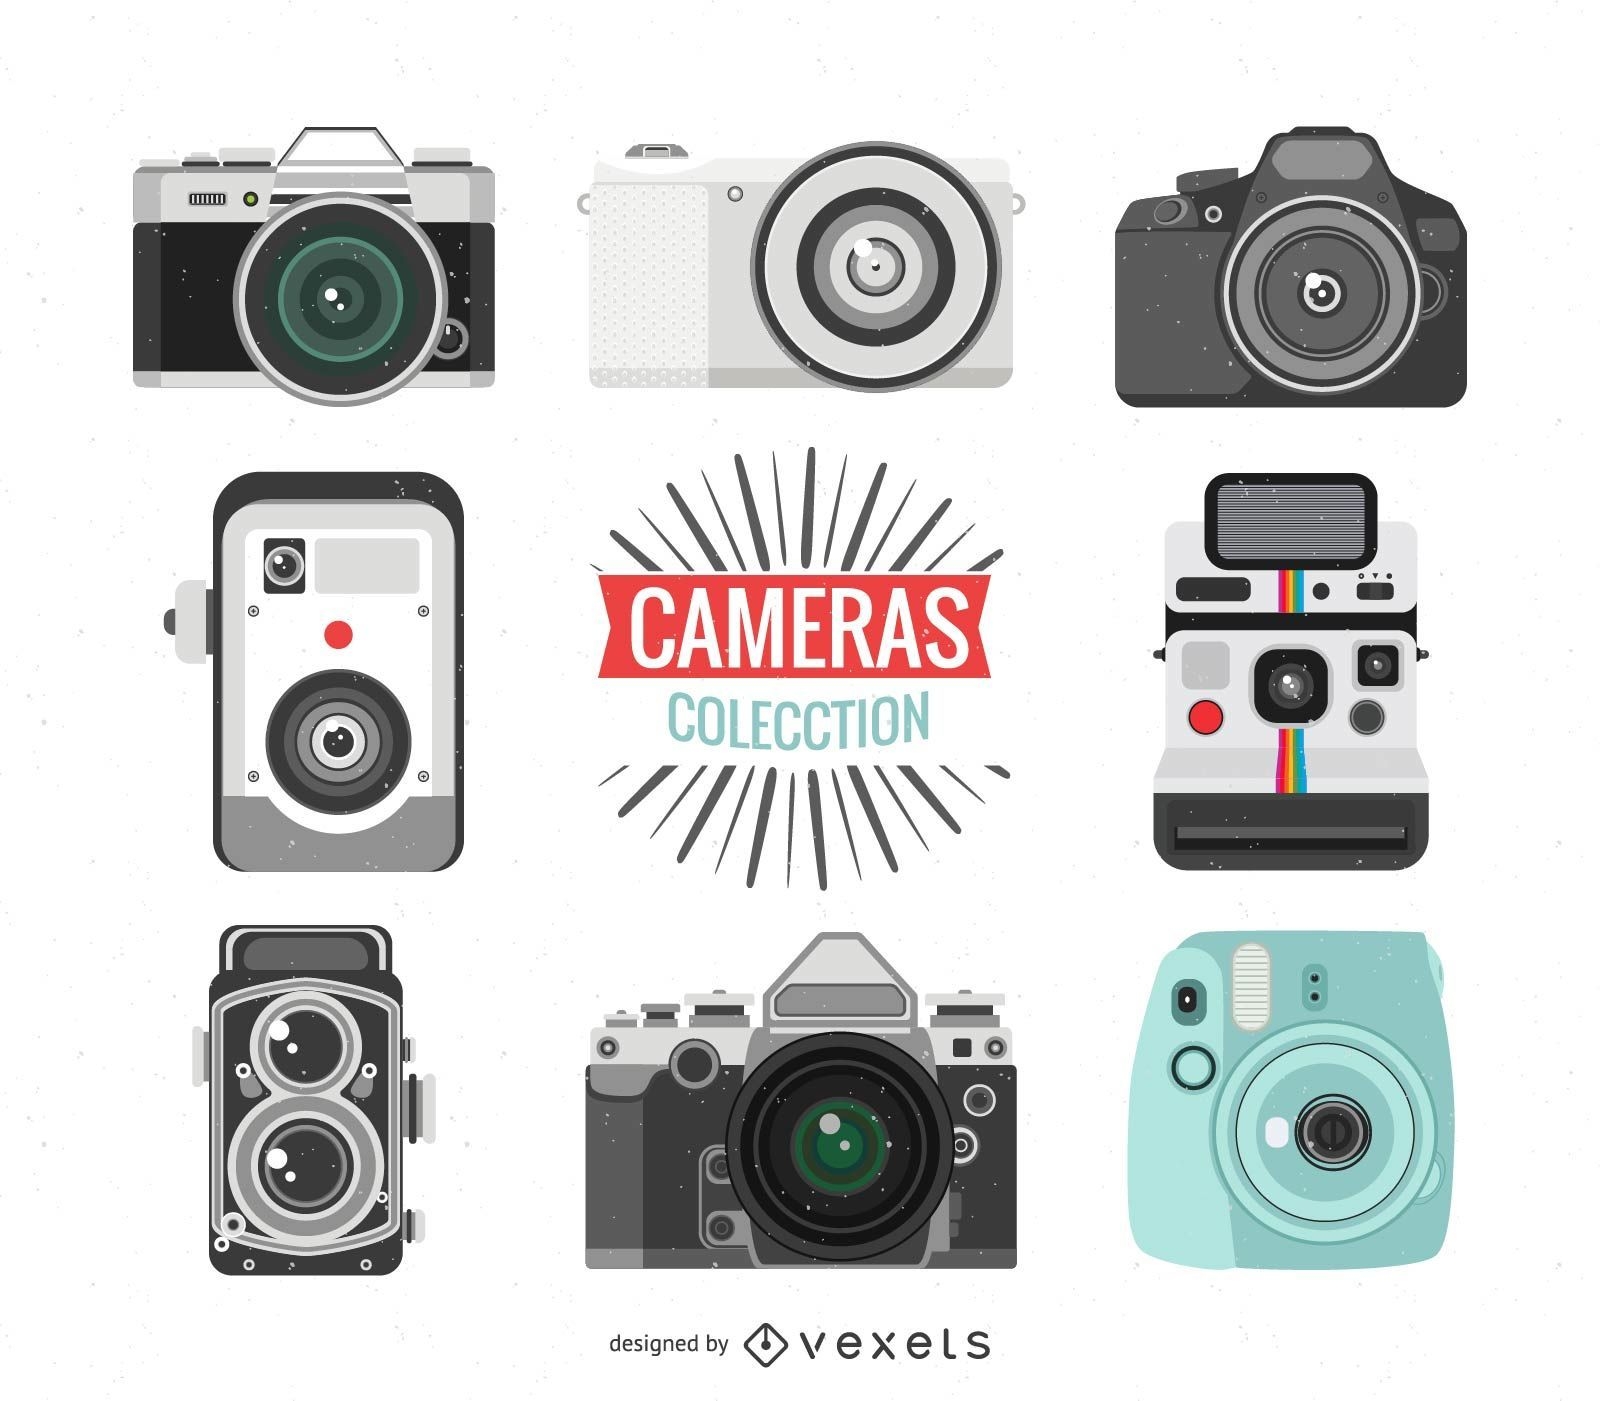 Download Collection of vintage camera illustrations - Vector download